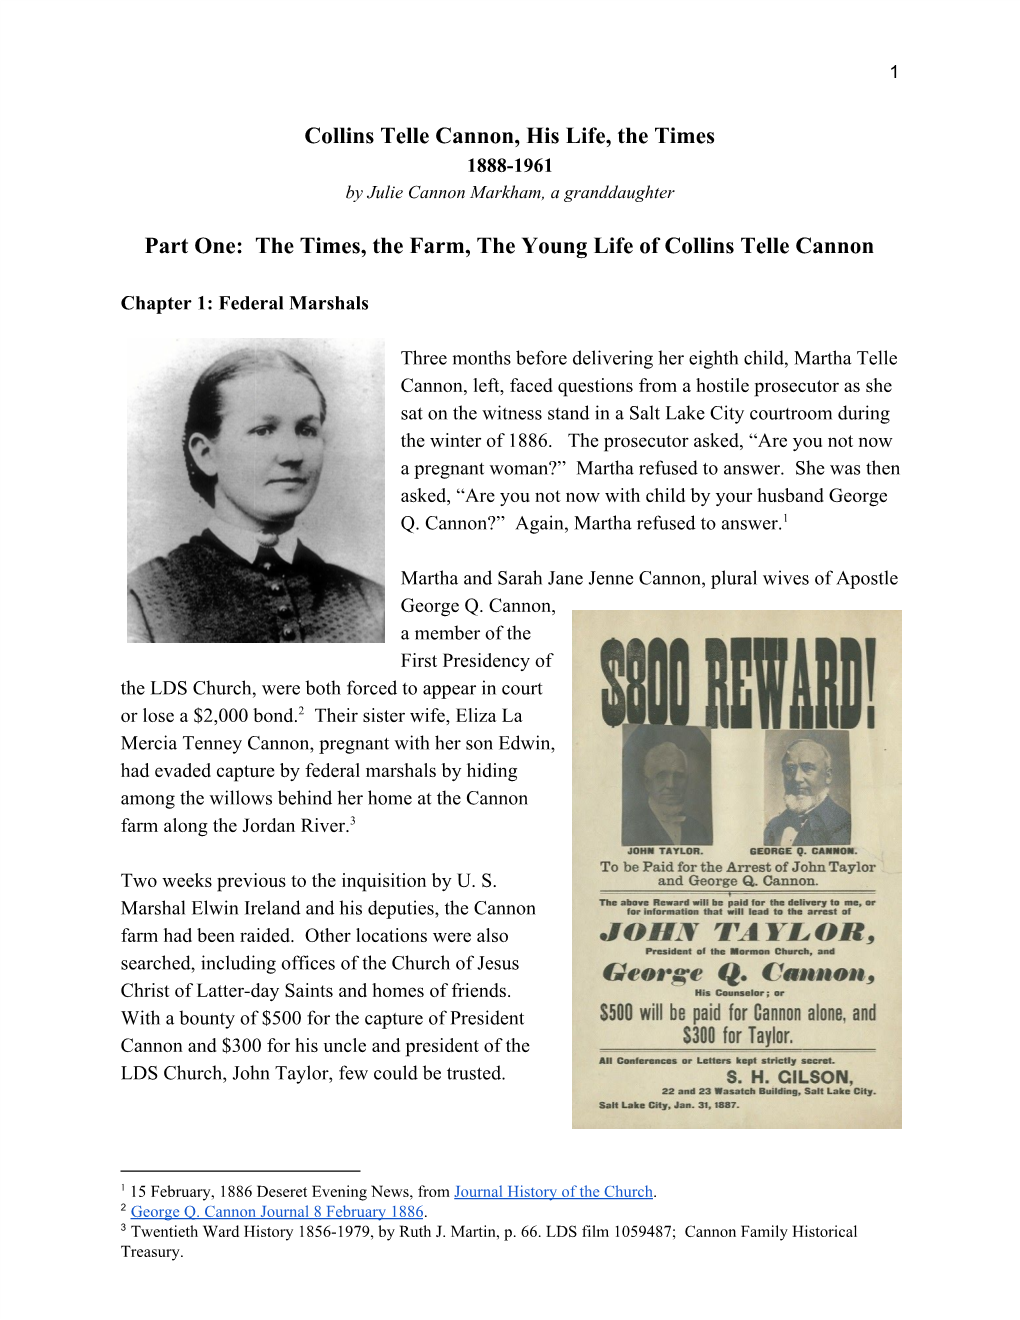 Collins Telle Cannon, His Life, the Times Part